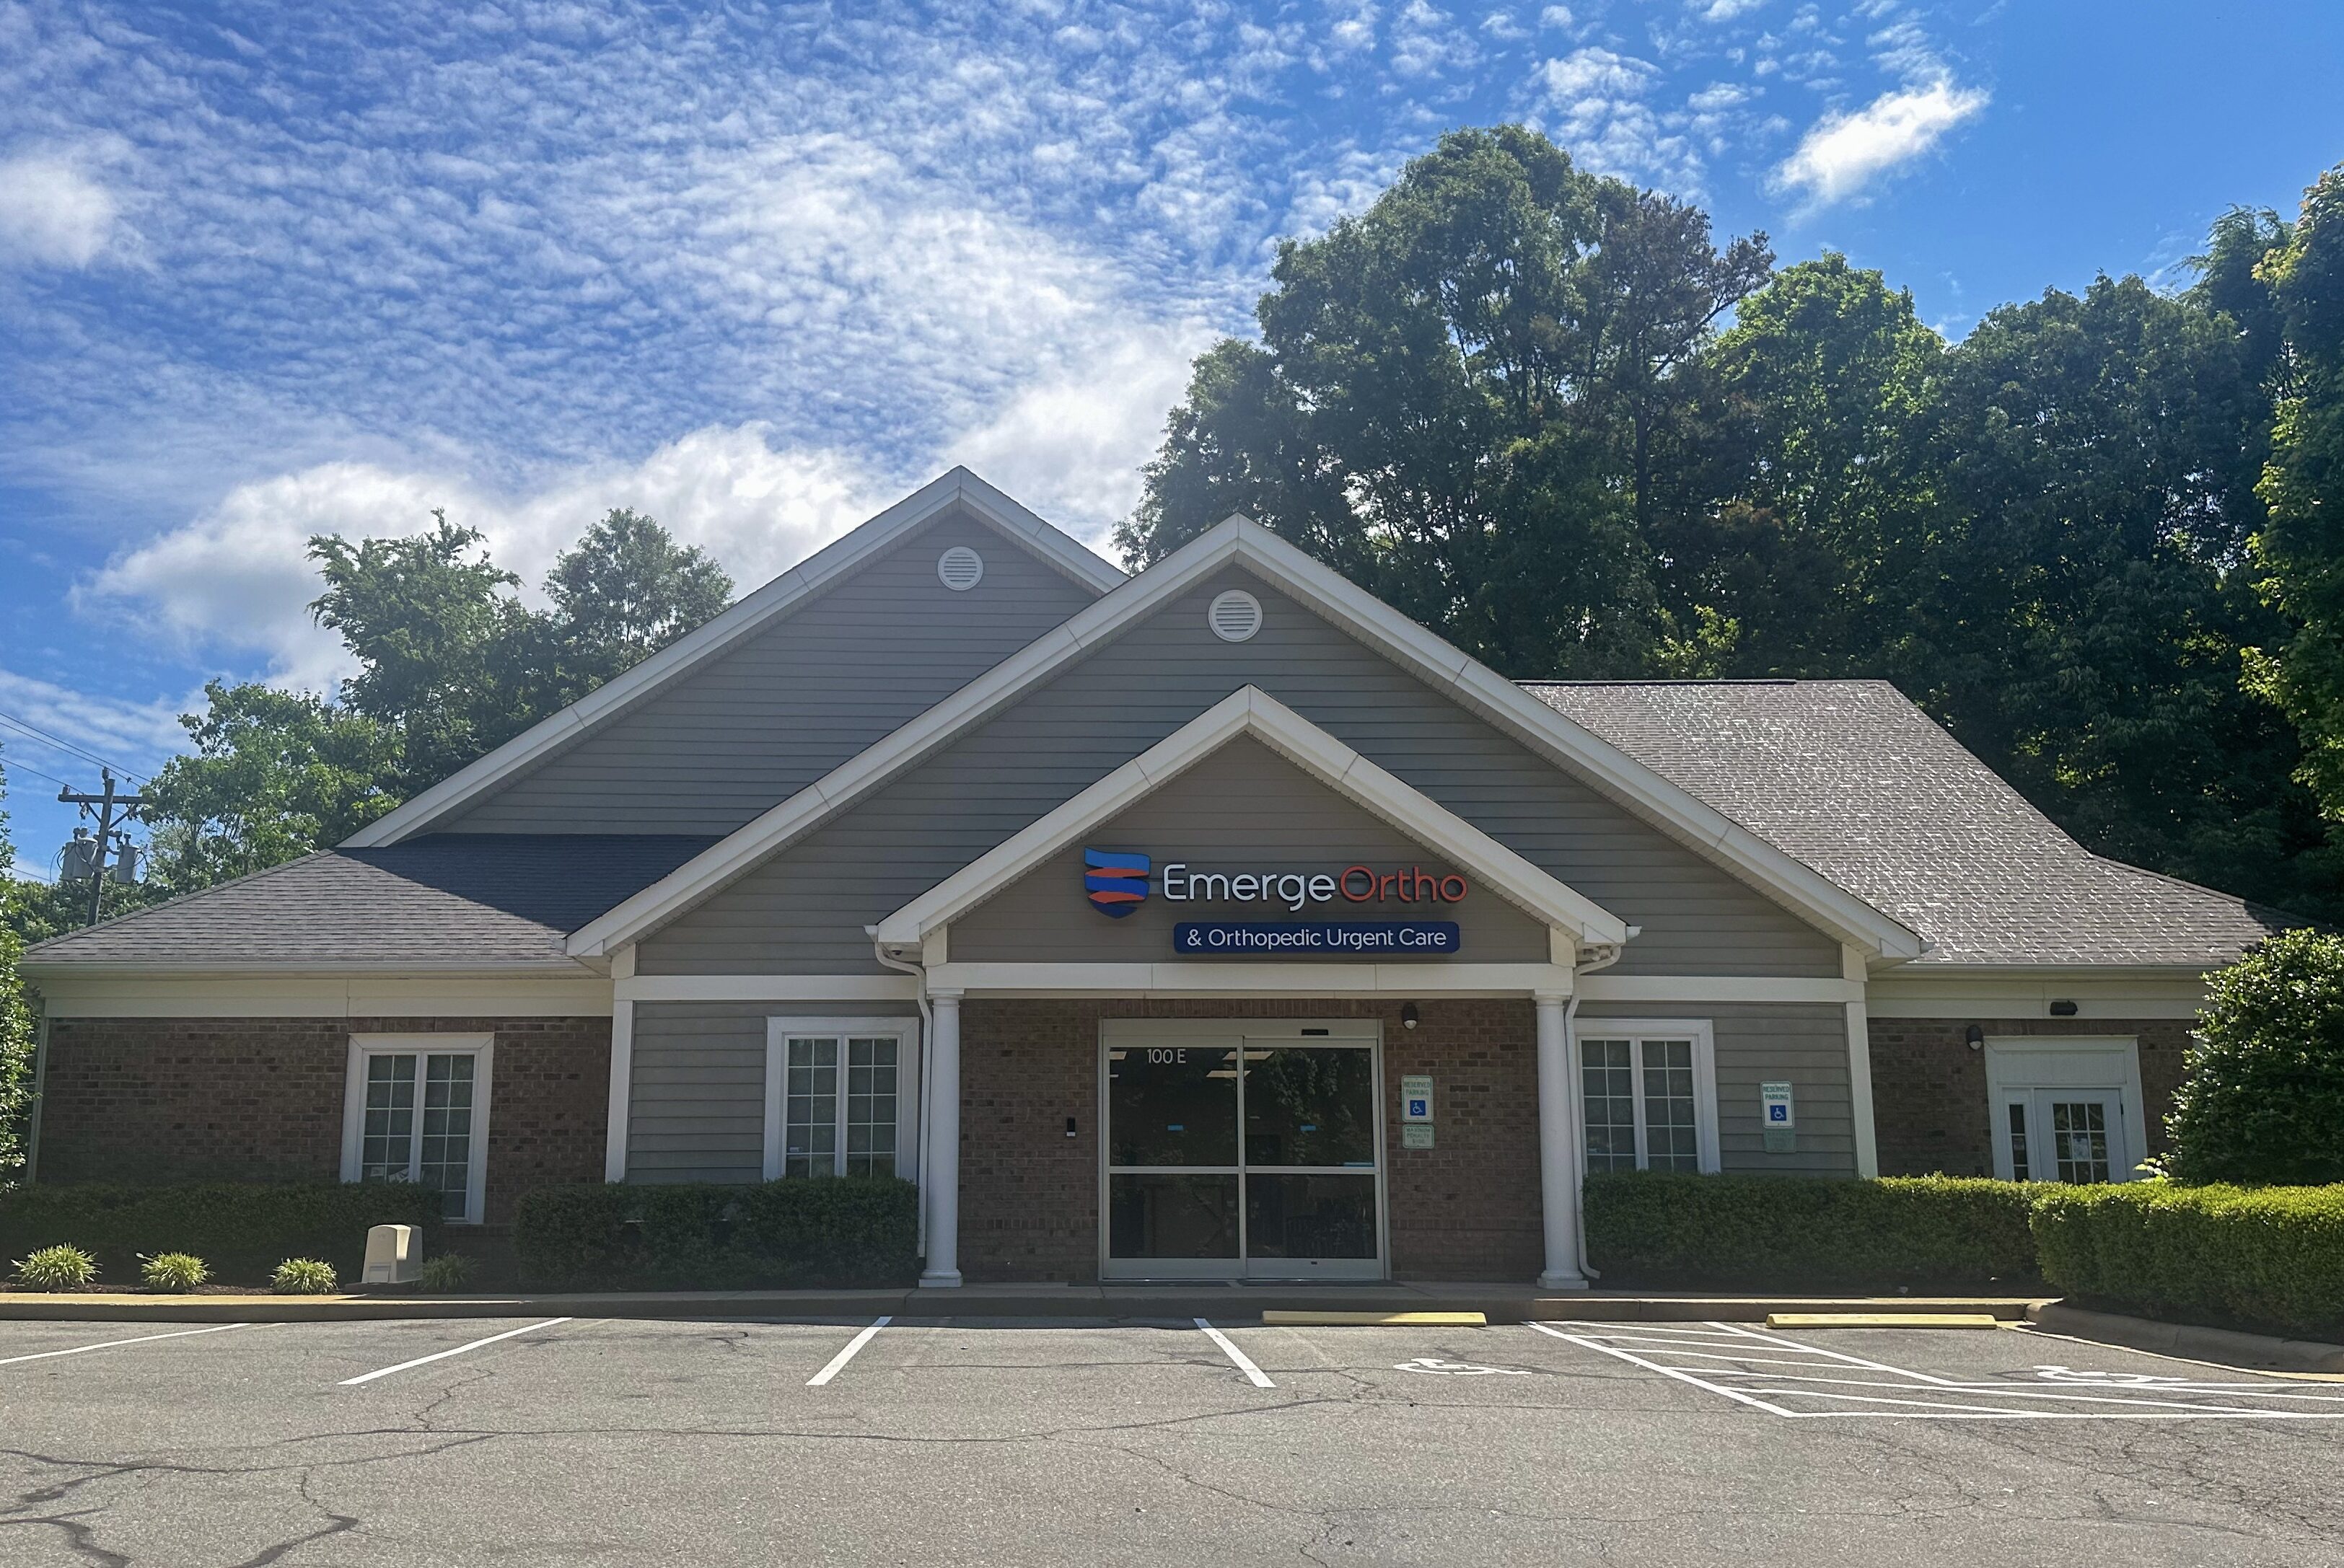 EmergeOrtho Announces New Orthopedic Urgent Care and Physical Therapy Location in Mebane, NC